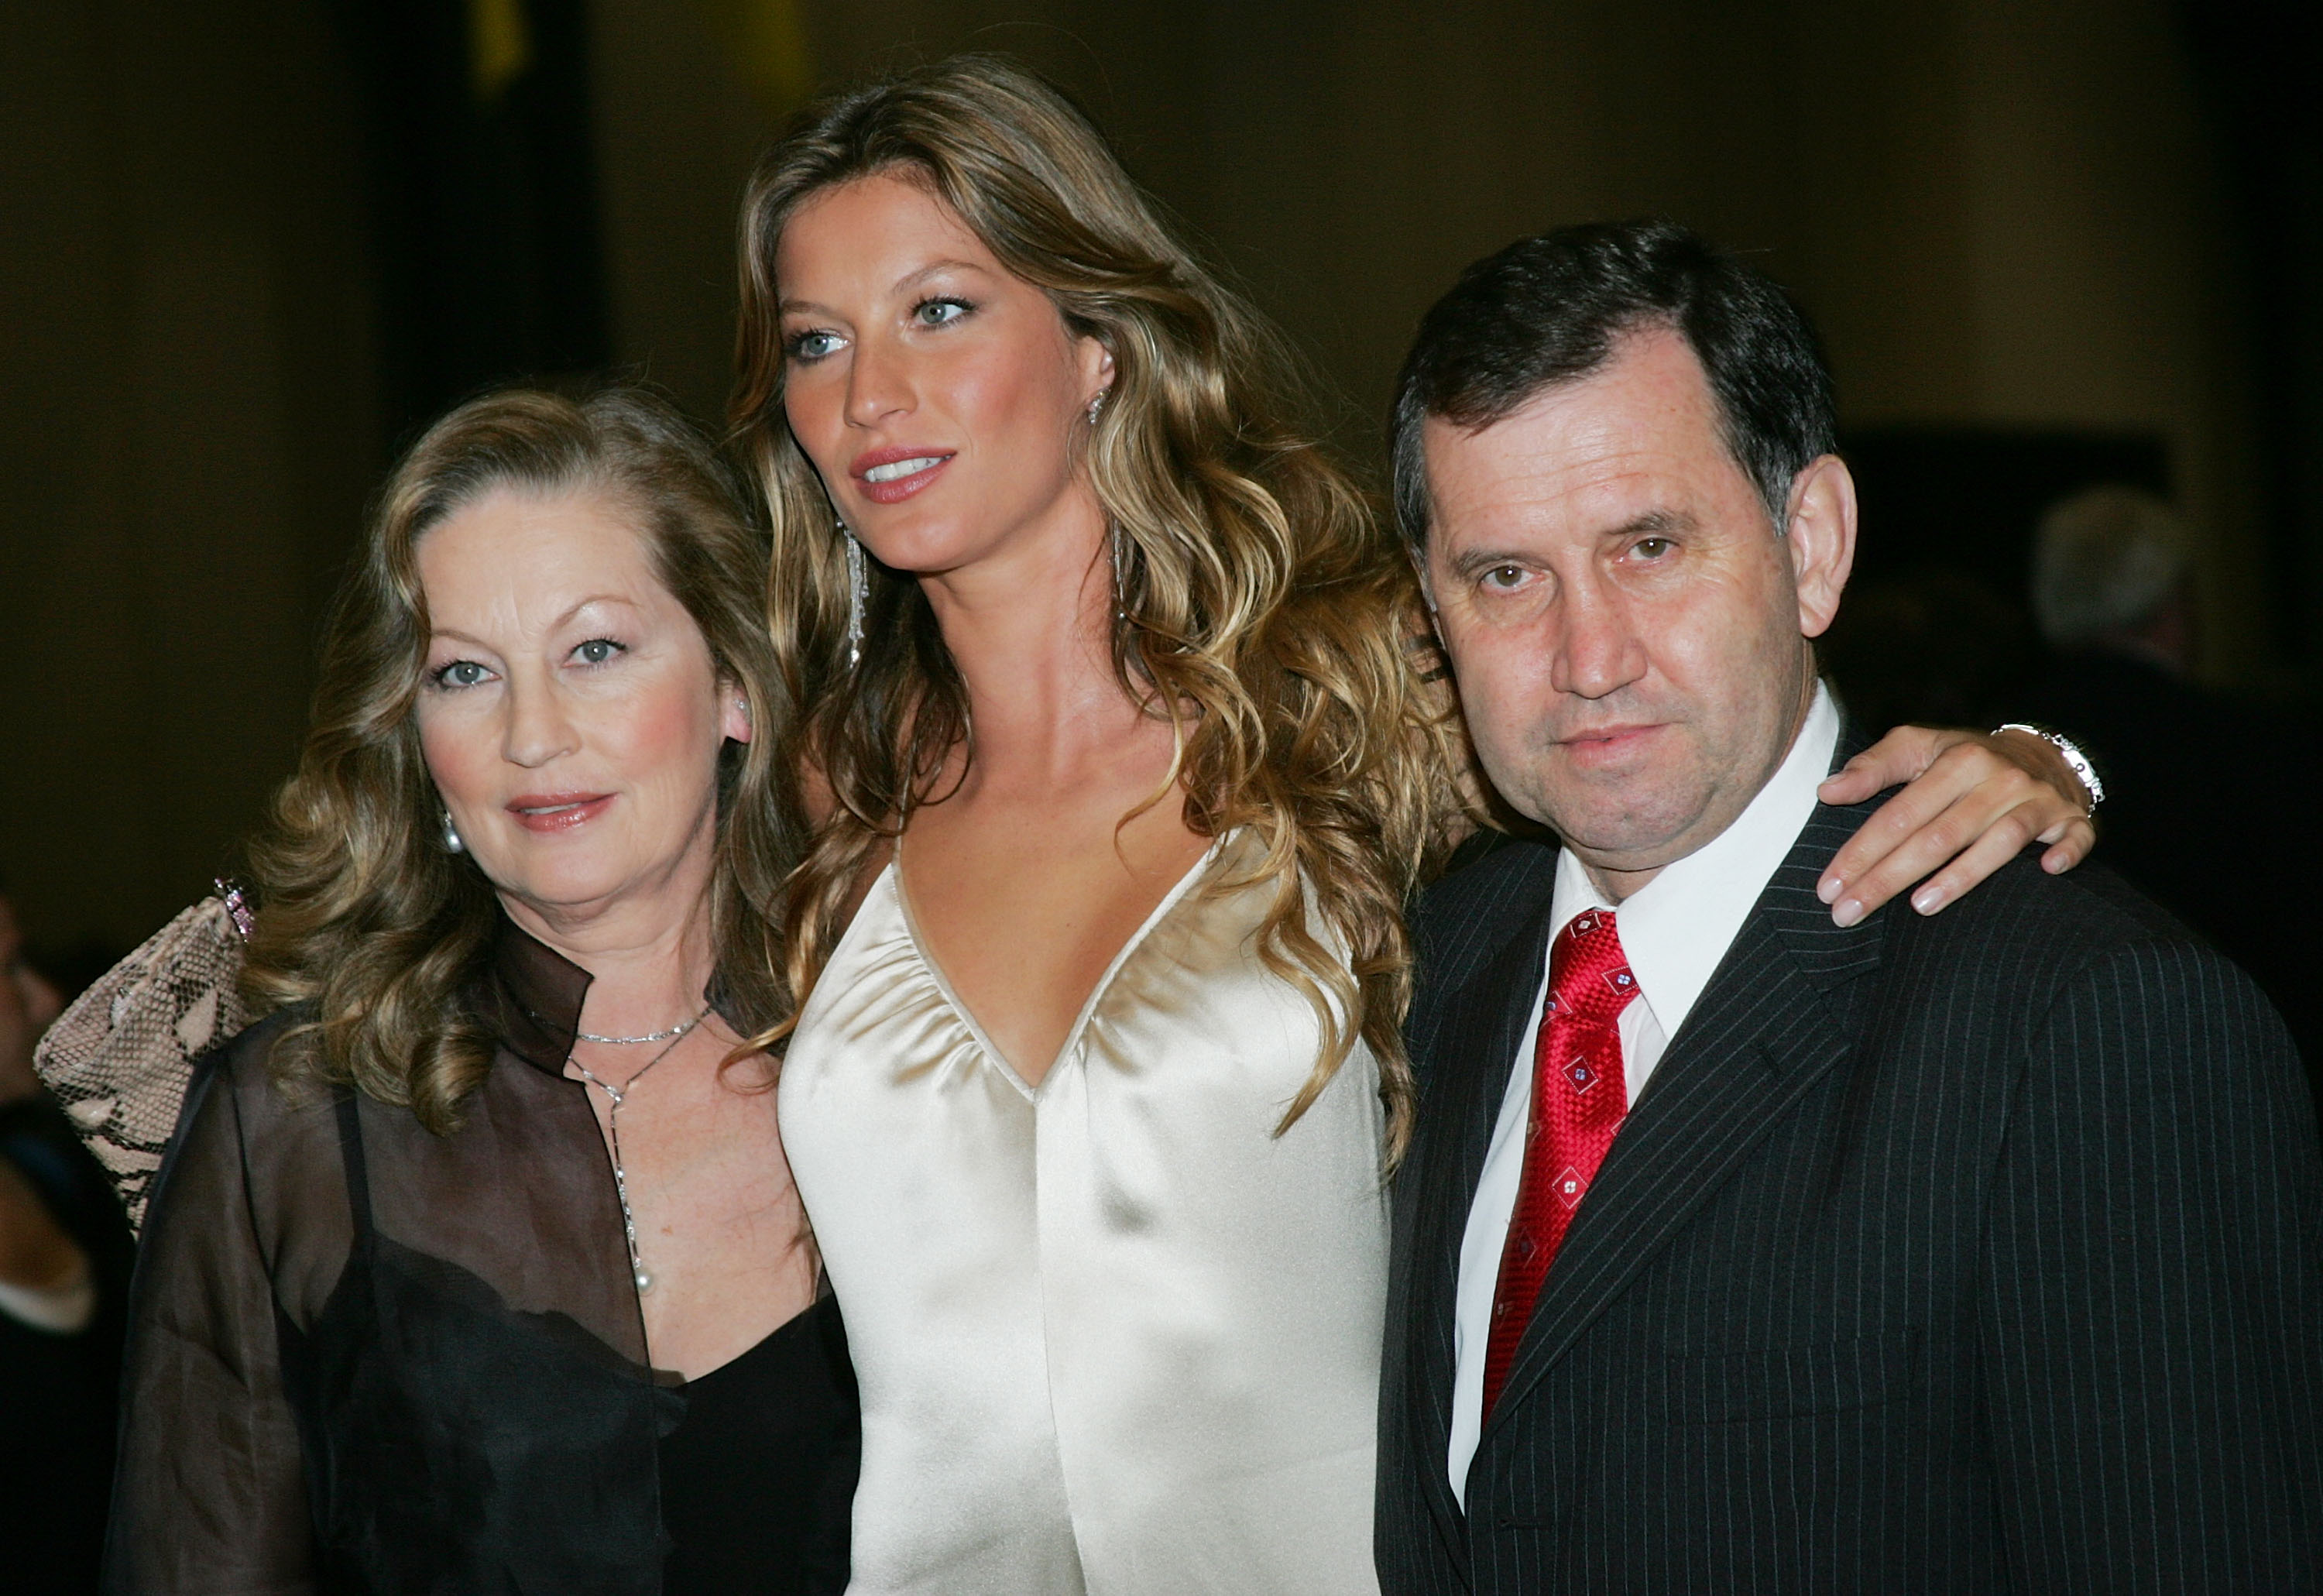 Vânia Nonnenmarcher, Gisele, and Valdir Bündchen at the premiere of "Taxi" in New York City on October 3, 2004 | Source: Getty Images